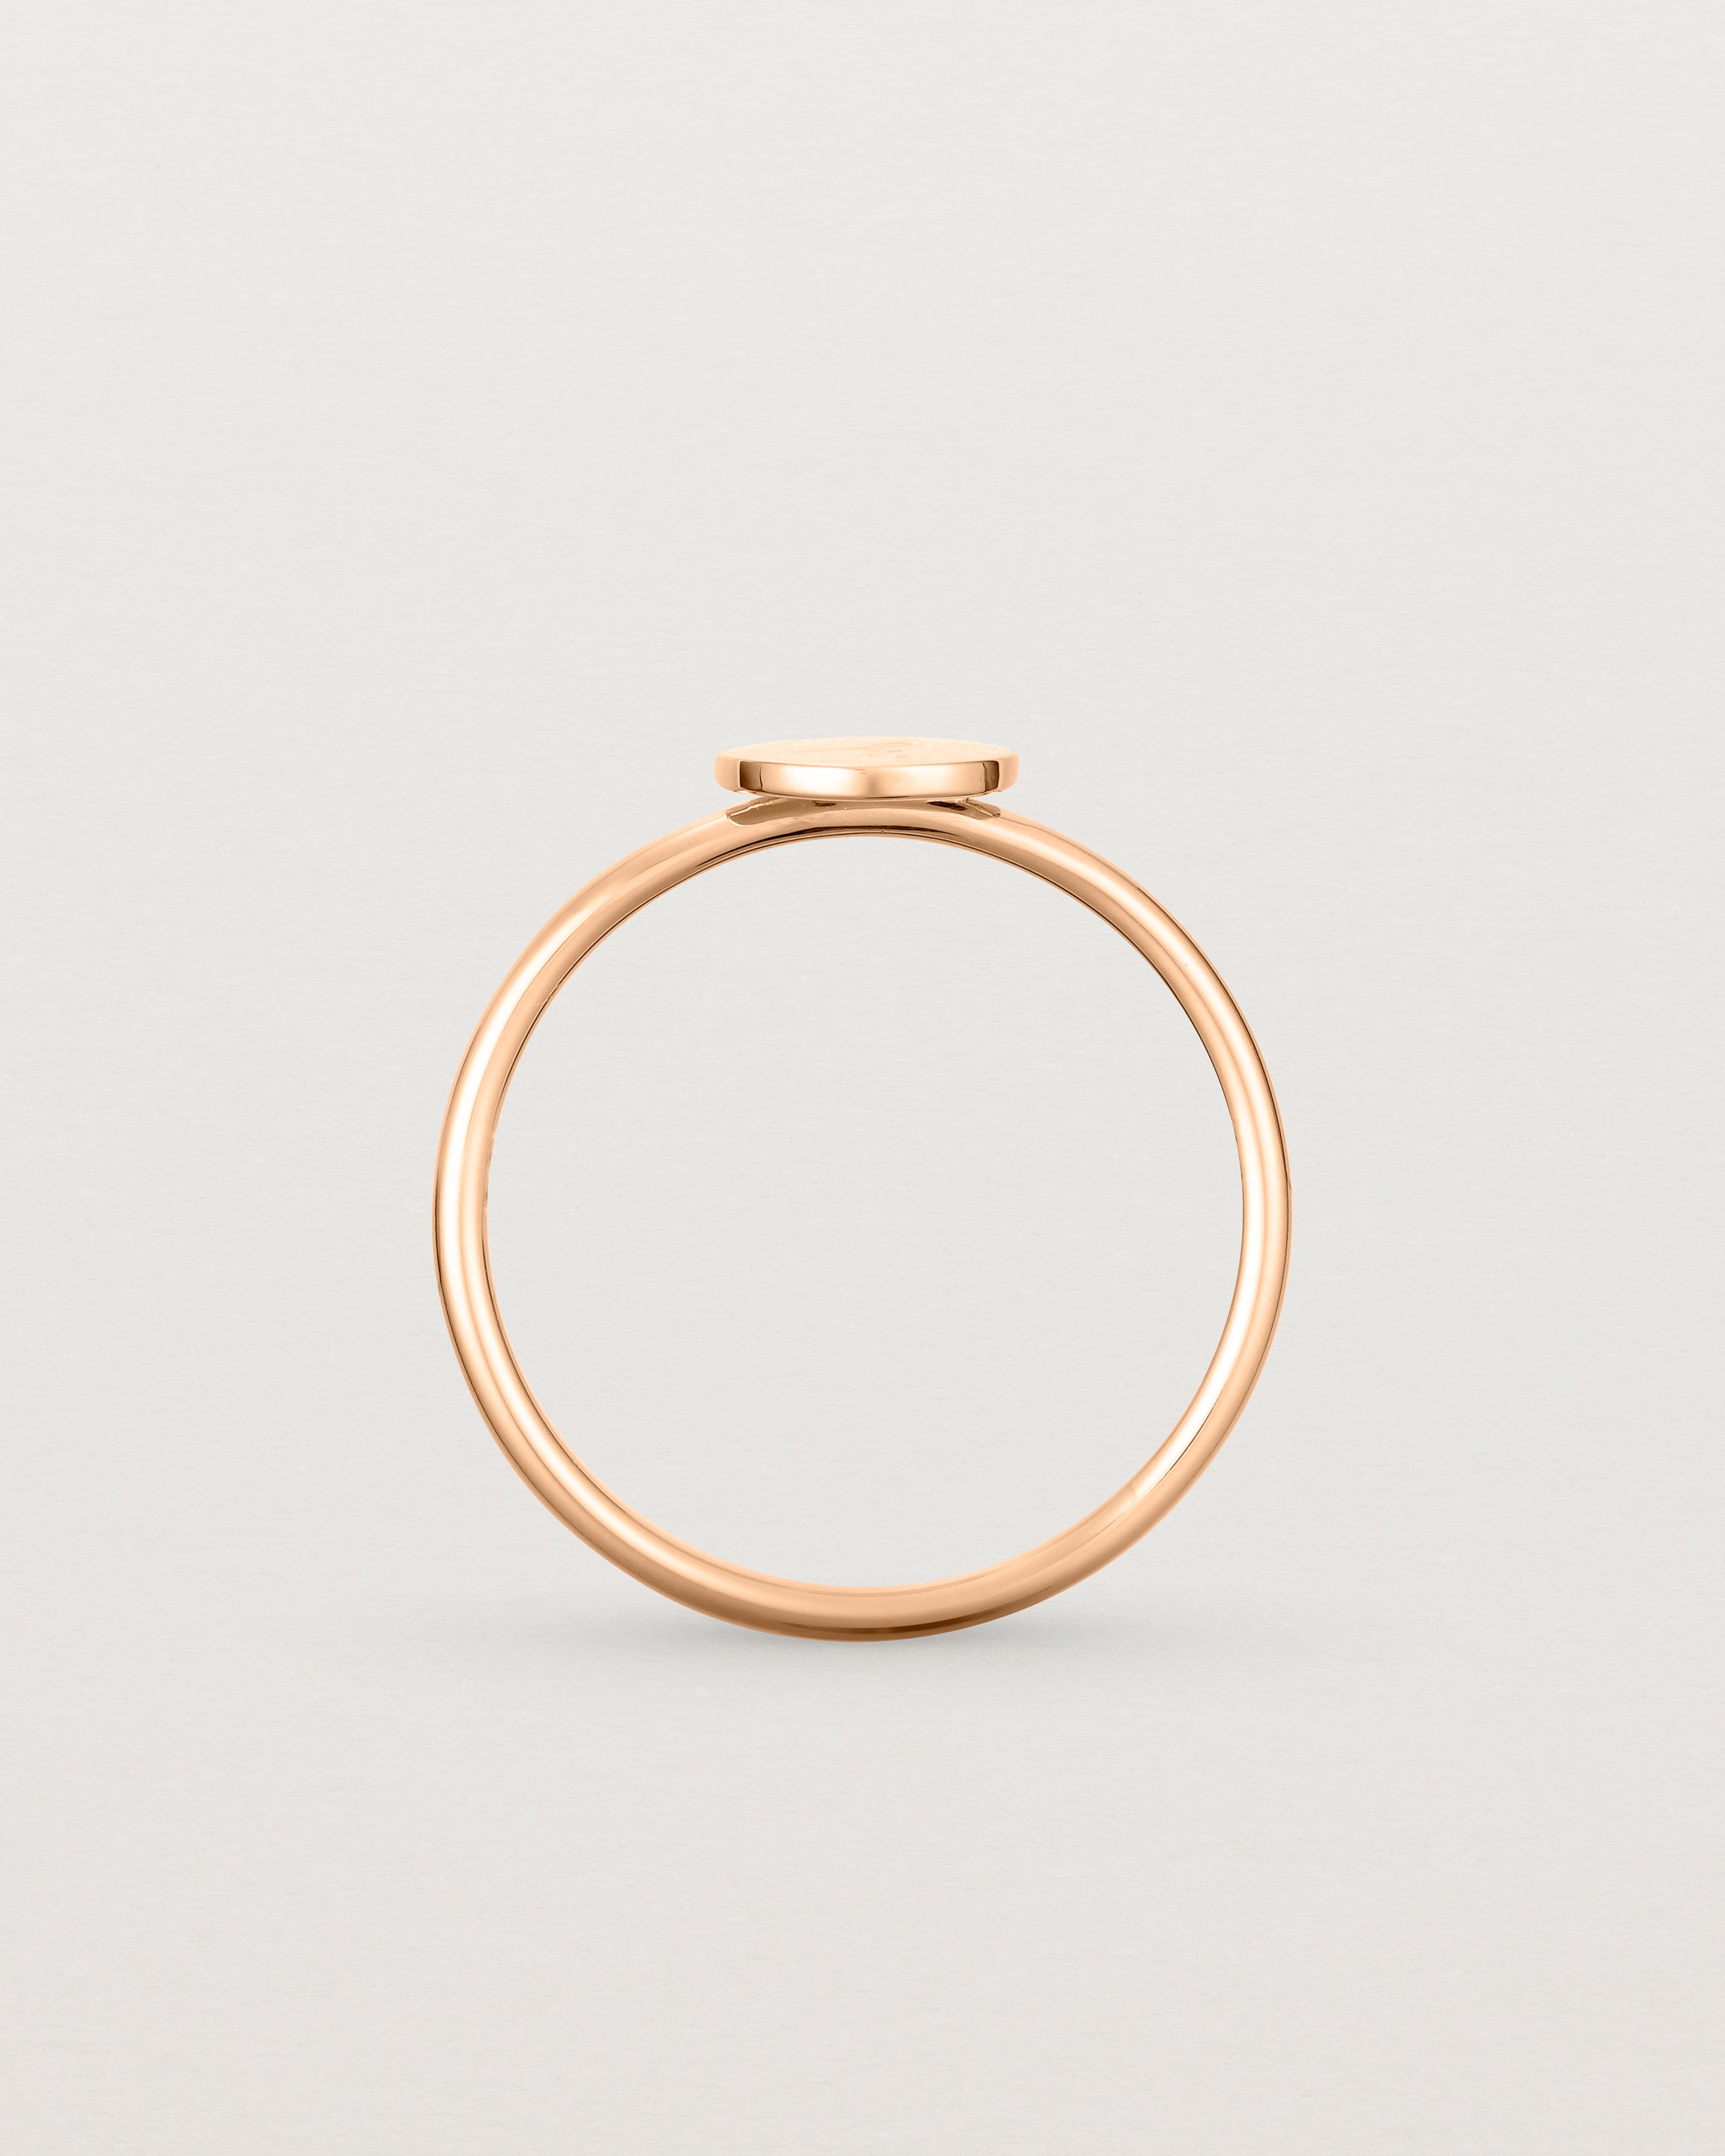 Standing view of the Precious Initial Ring in Rose Gold.